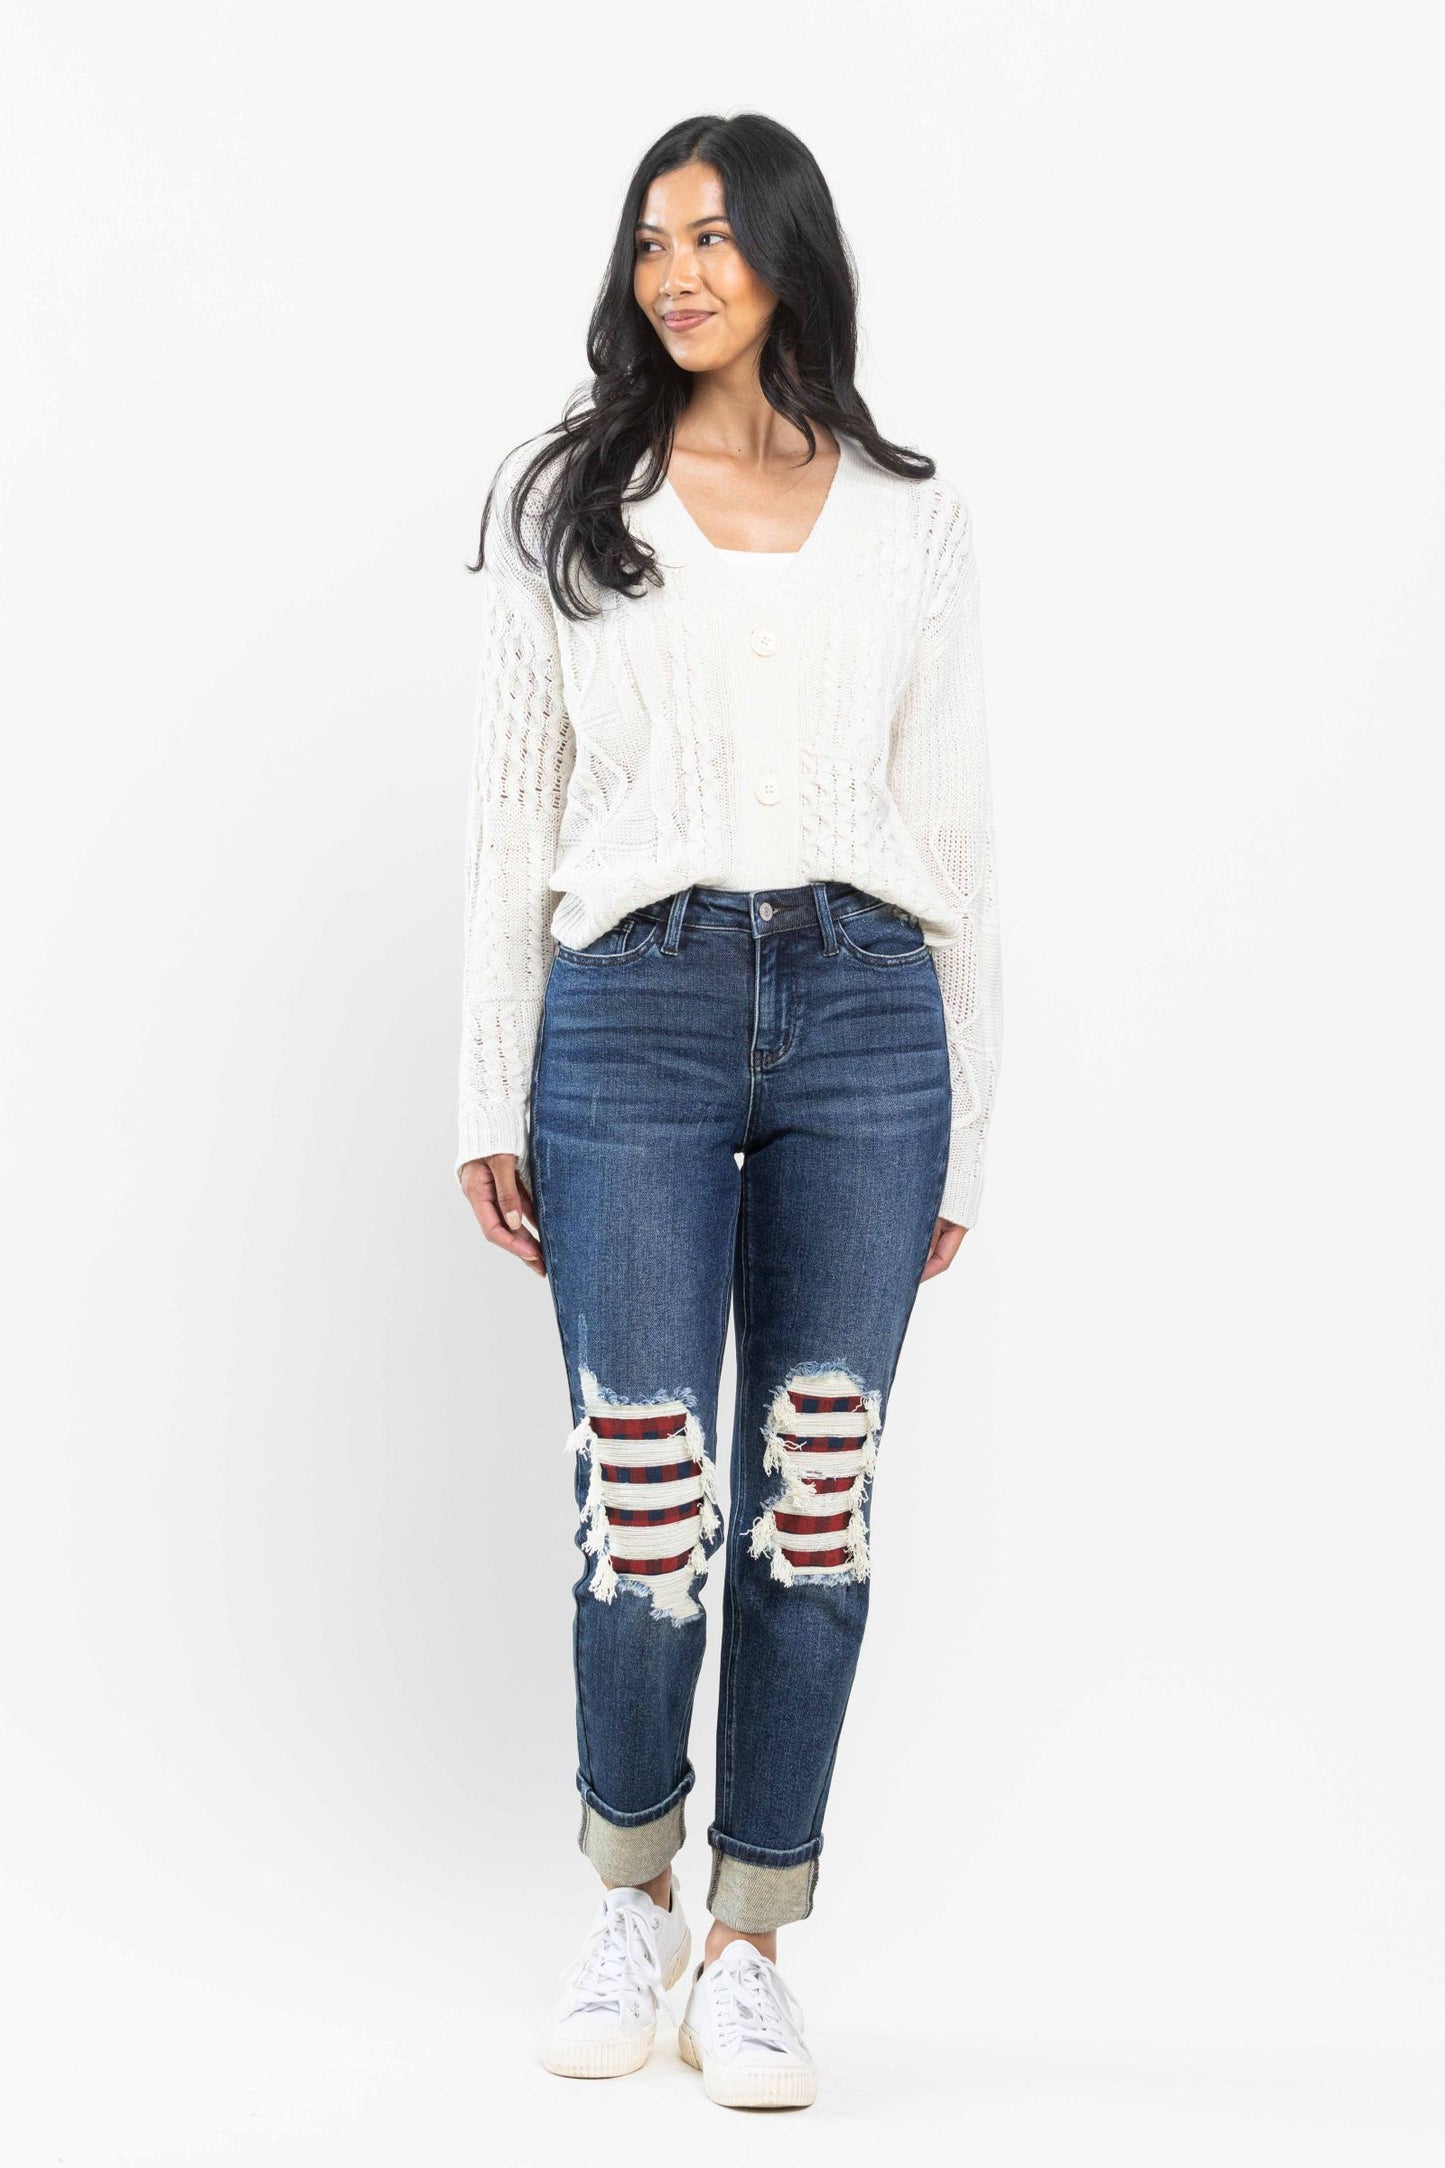 Arriving 10/3 - PreOrder - Judy Blue MidRise Buffalo Plaid Patch Destroyed Boyfriend Jeans